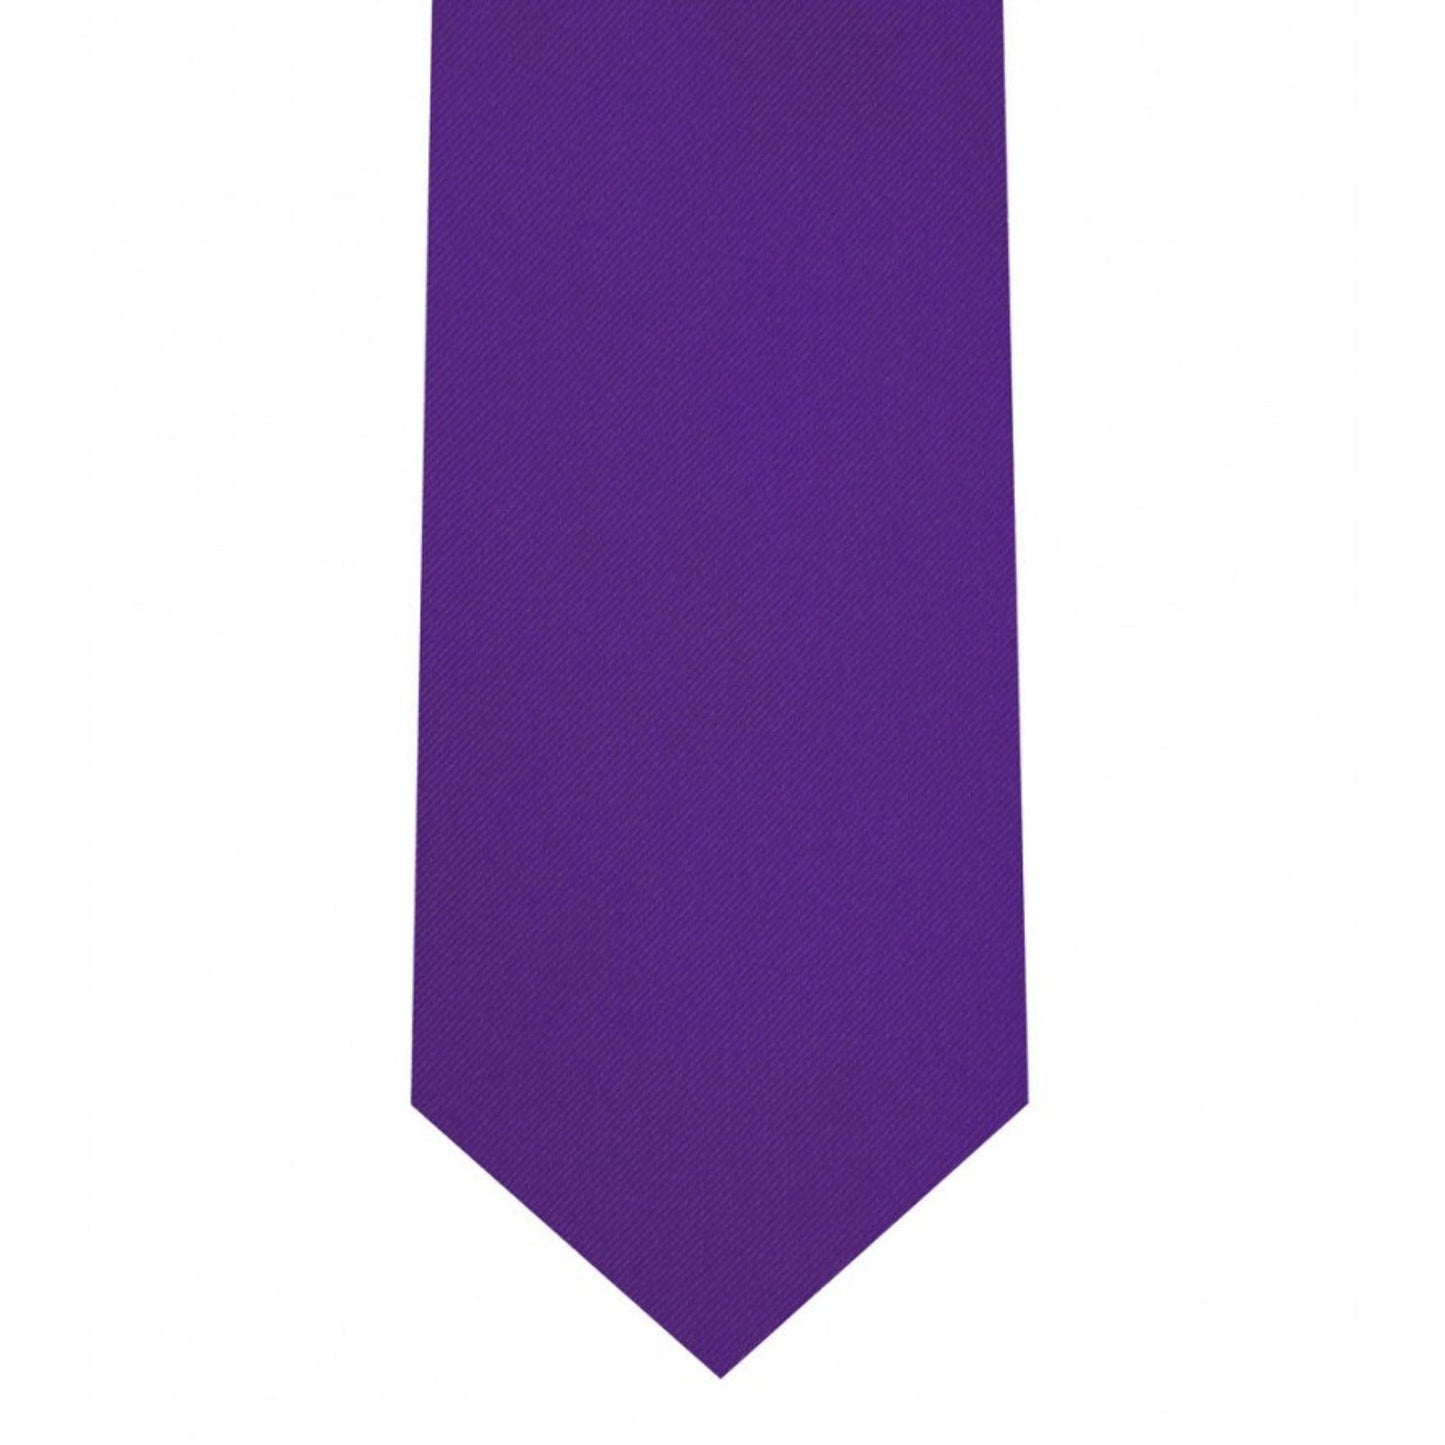 Classic Medium Purple Tie Skinny width 2.75 inches With Matching Pocket Square | KCT Menswear